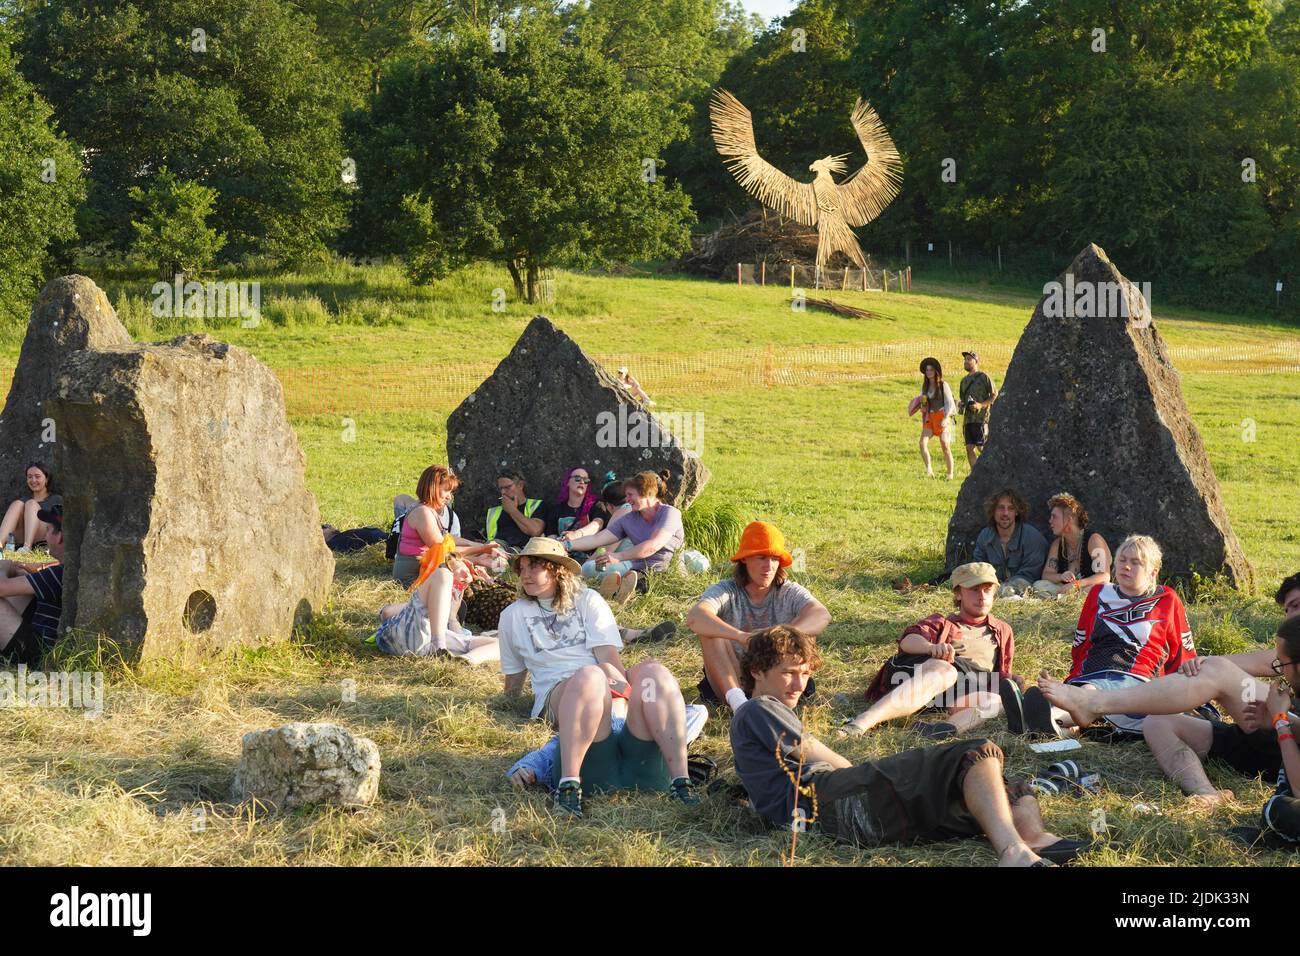 Glastonbury, UK. Tuesday, 21 June, 2022. On-site workers relaxing a day before Glastonbury 2022 opens its doors to the public. Photo: Richard Gray/Alamy Live News Stock Photo